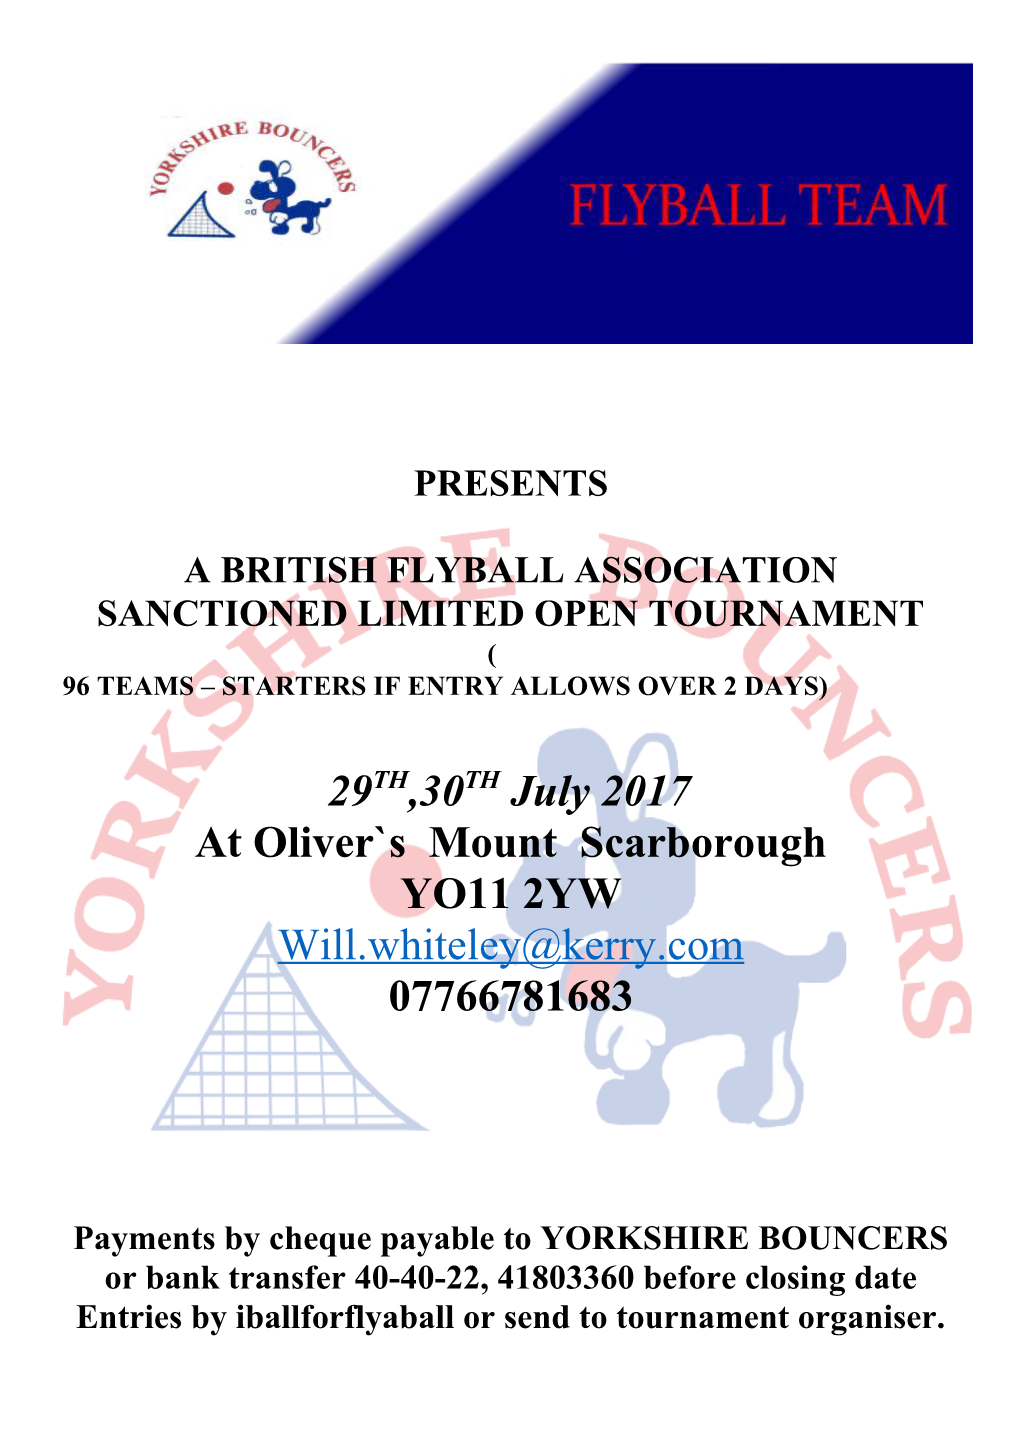 A British Flyball Association Sanctioned Limited Open Tournament